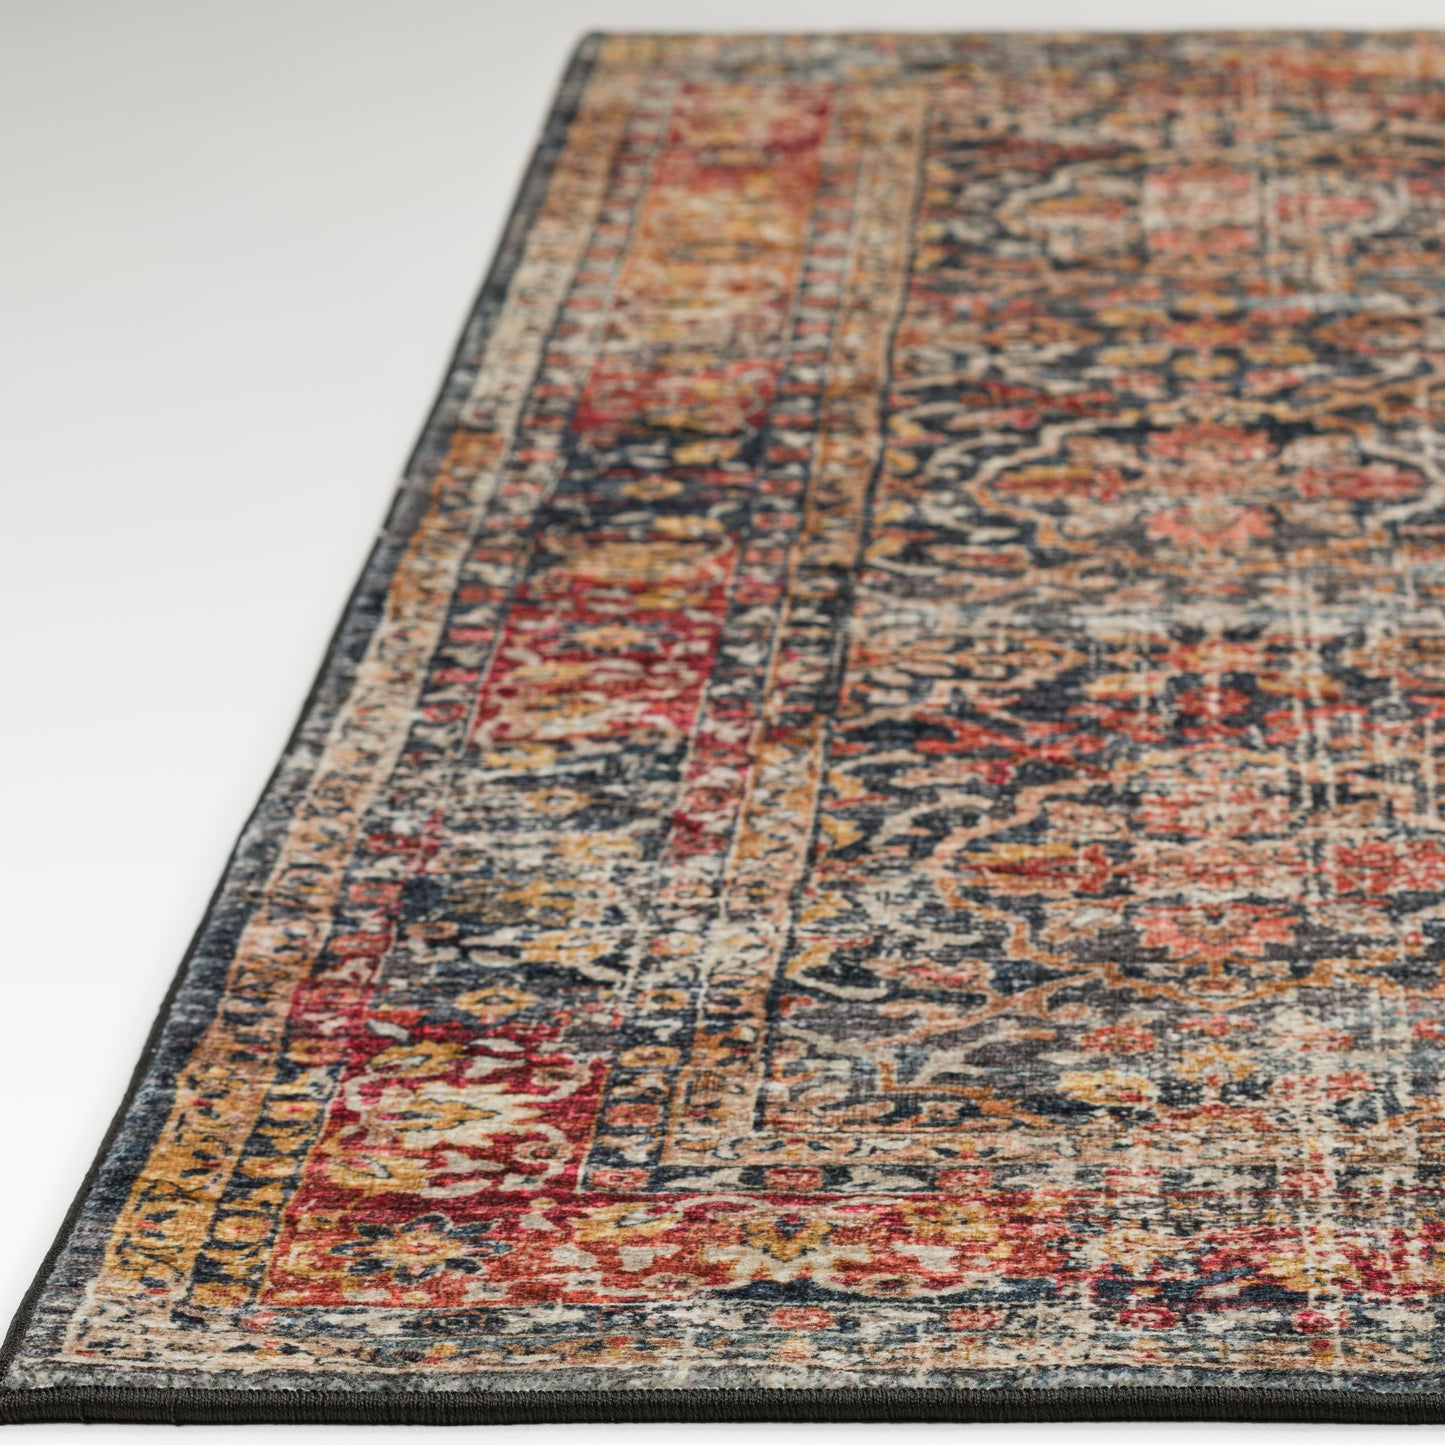 Jericho JC3 Tufted Synthetic Blend Indoor Area Rug by Dalyn Rugs